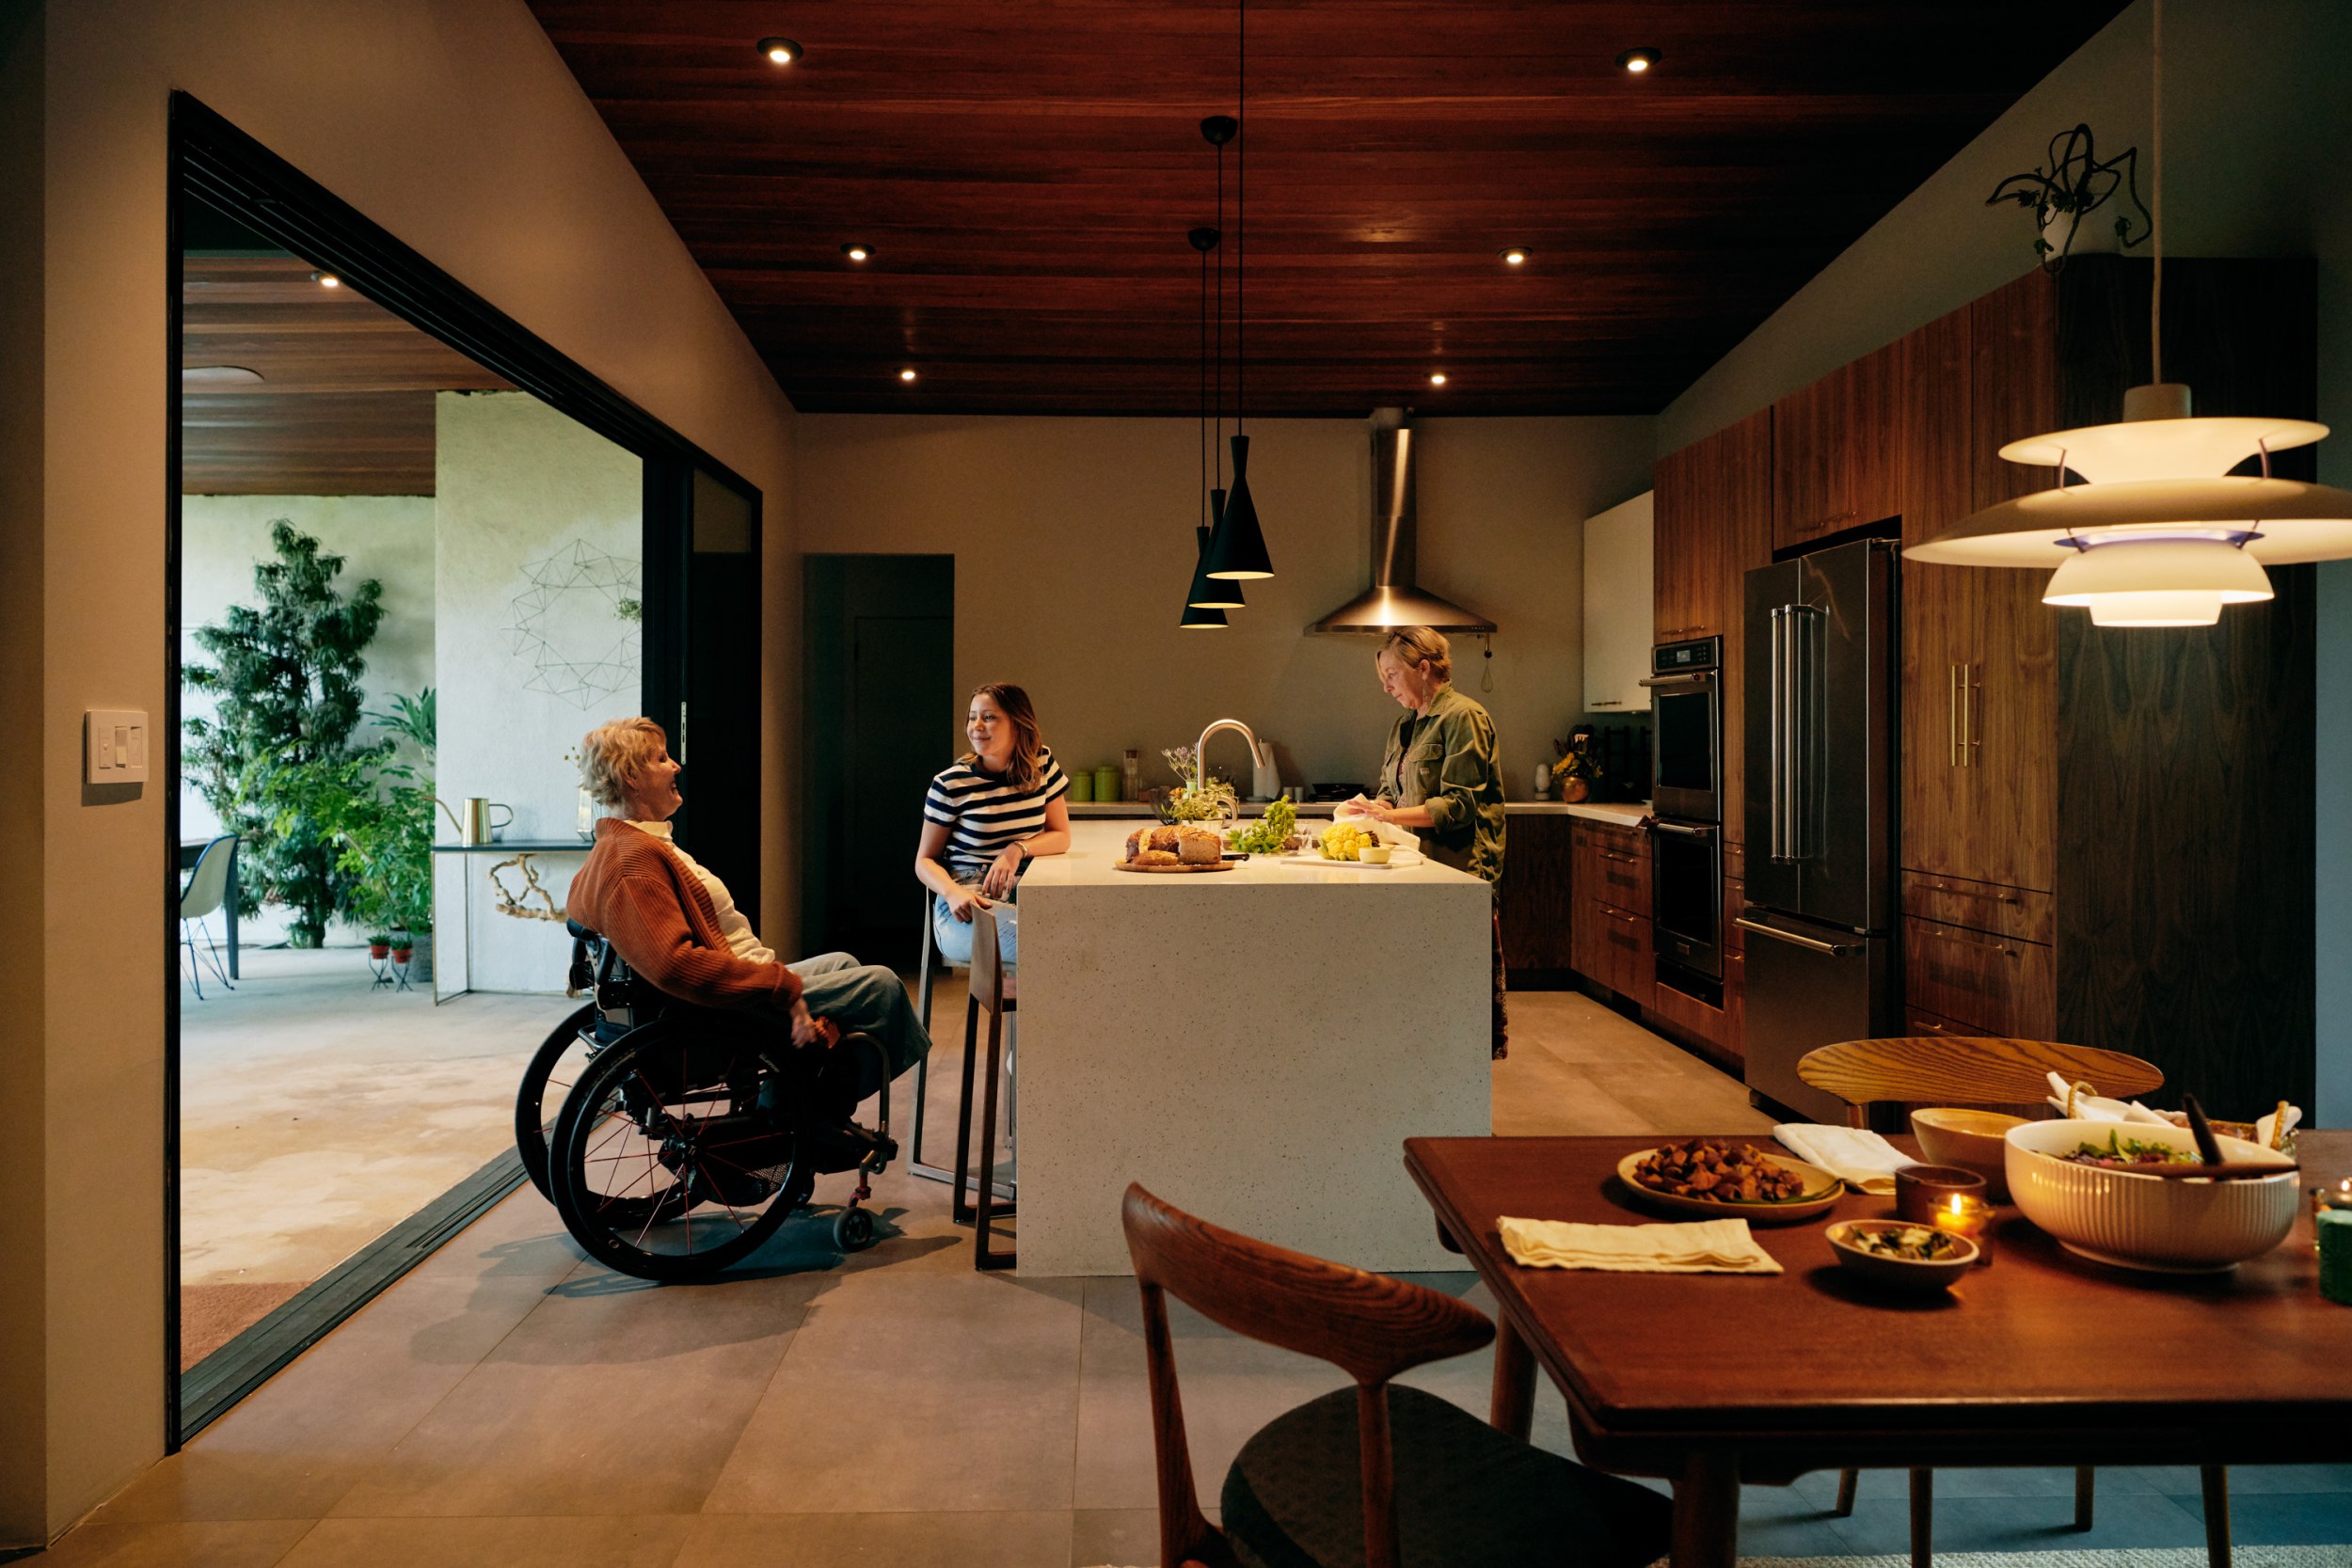 A person in a wheelchair having a conversation with two fellow travelers in an open floor plan kitchen at their Airbnb. Dining table set for a meal is in the foreground.